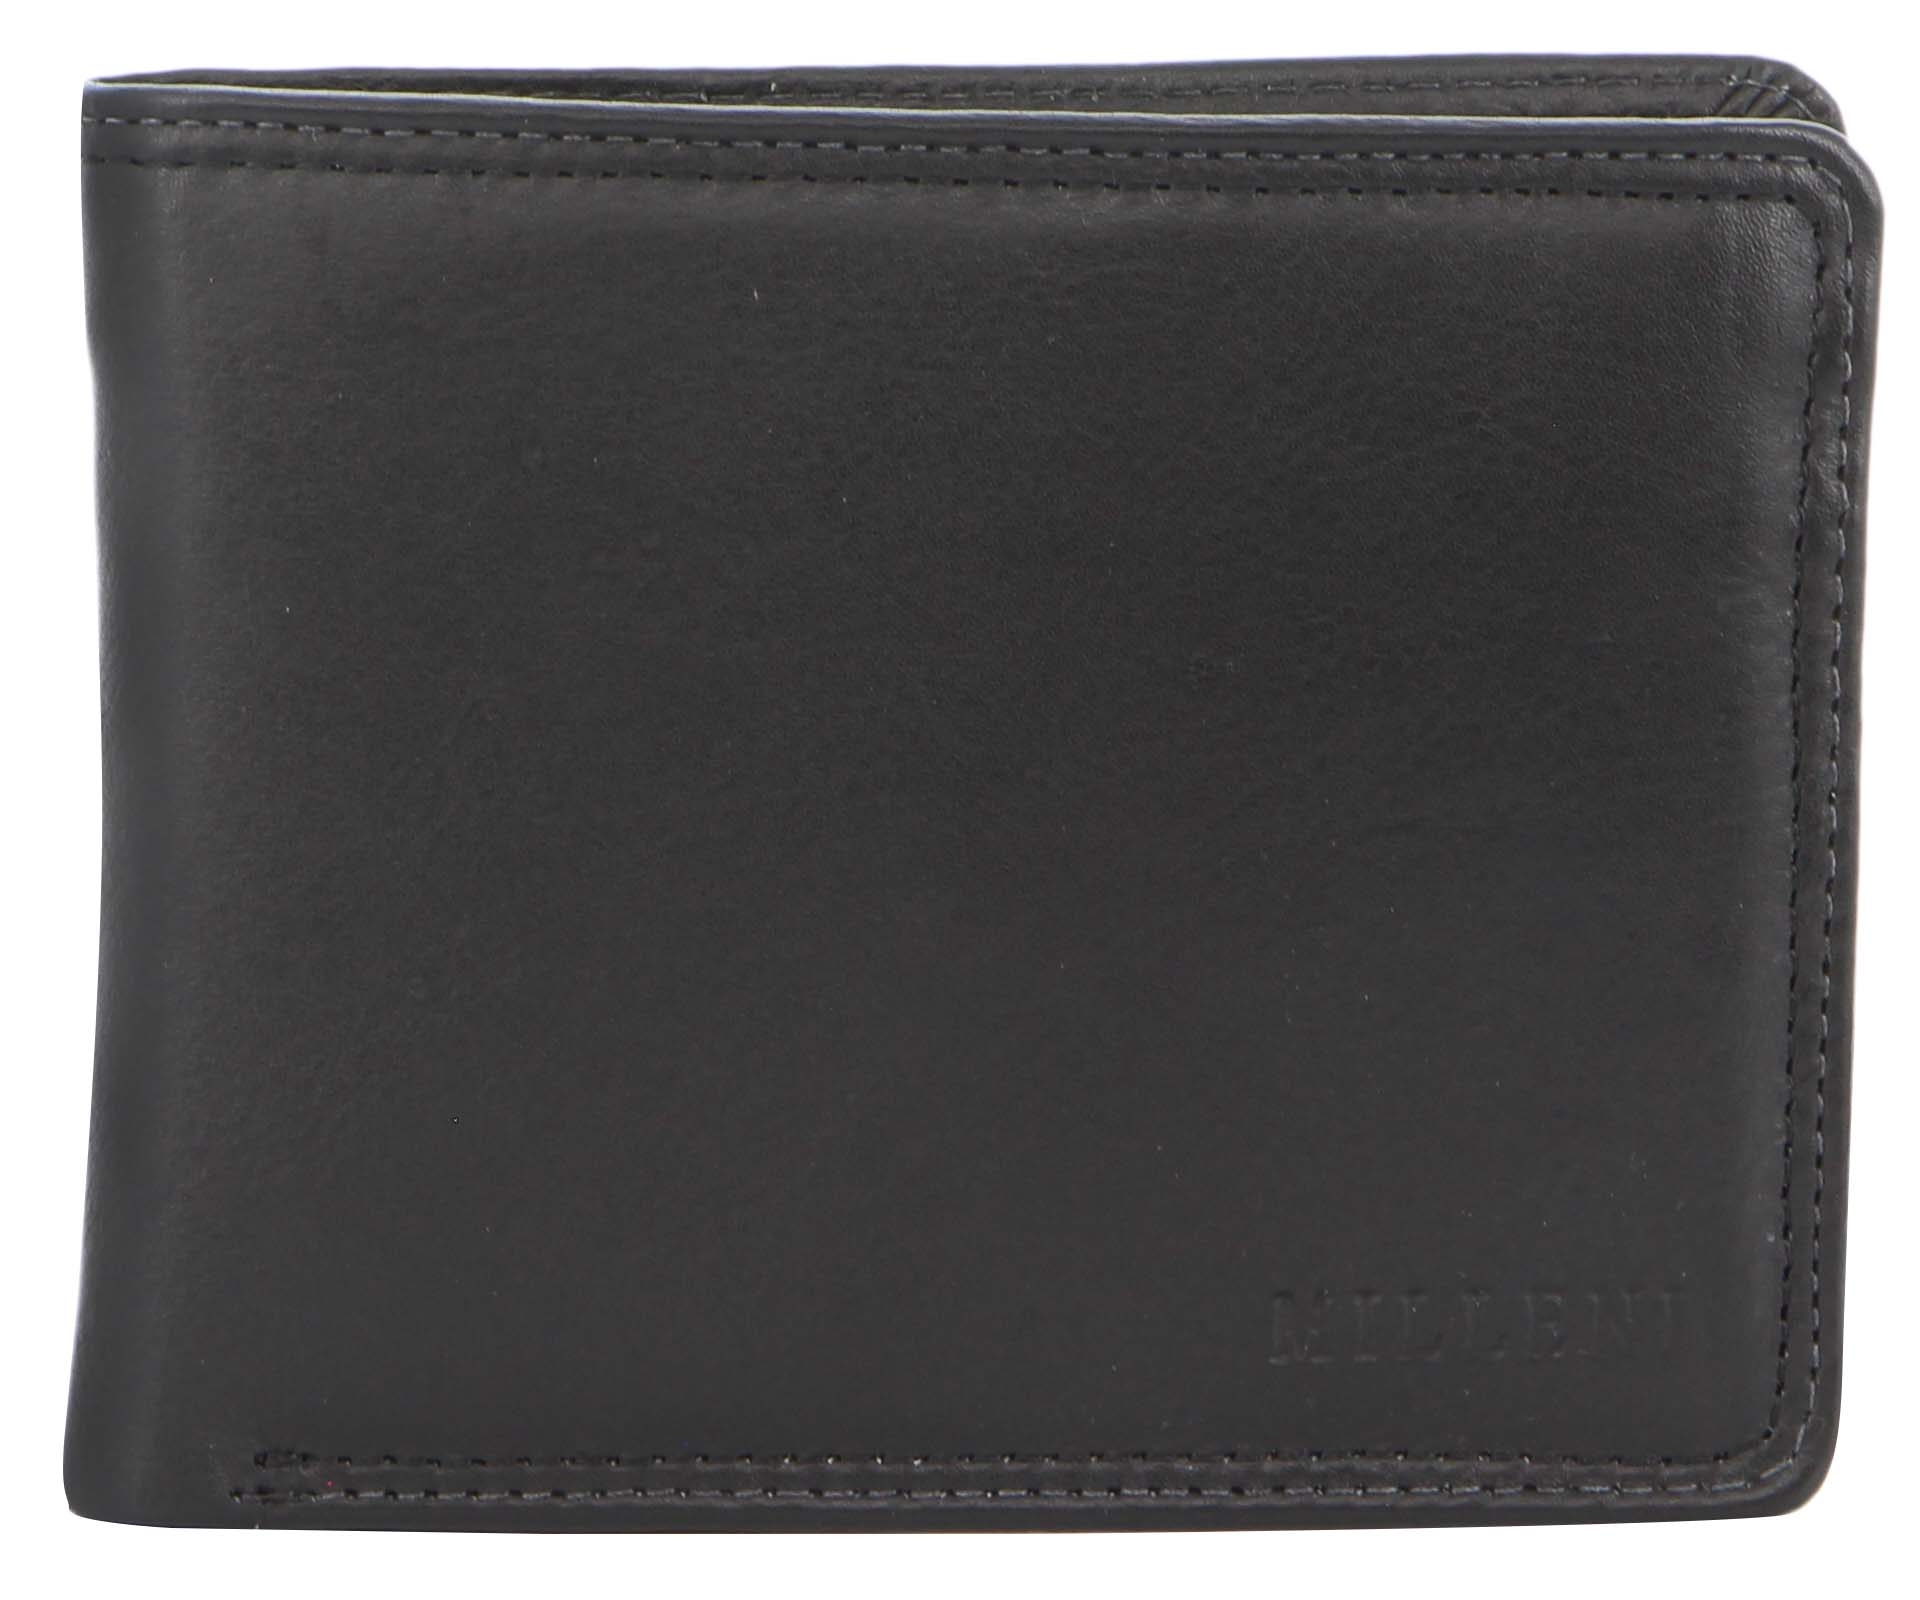 Men's Black Leather Wallet - Great Gift Ideas-Mens Gifts : Tessa Maes ...